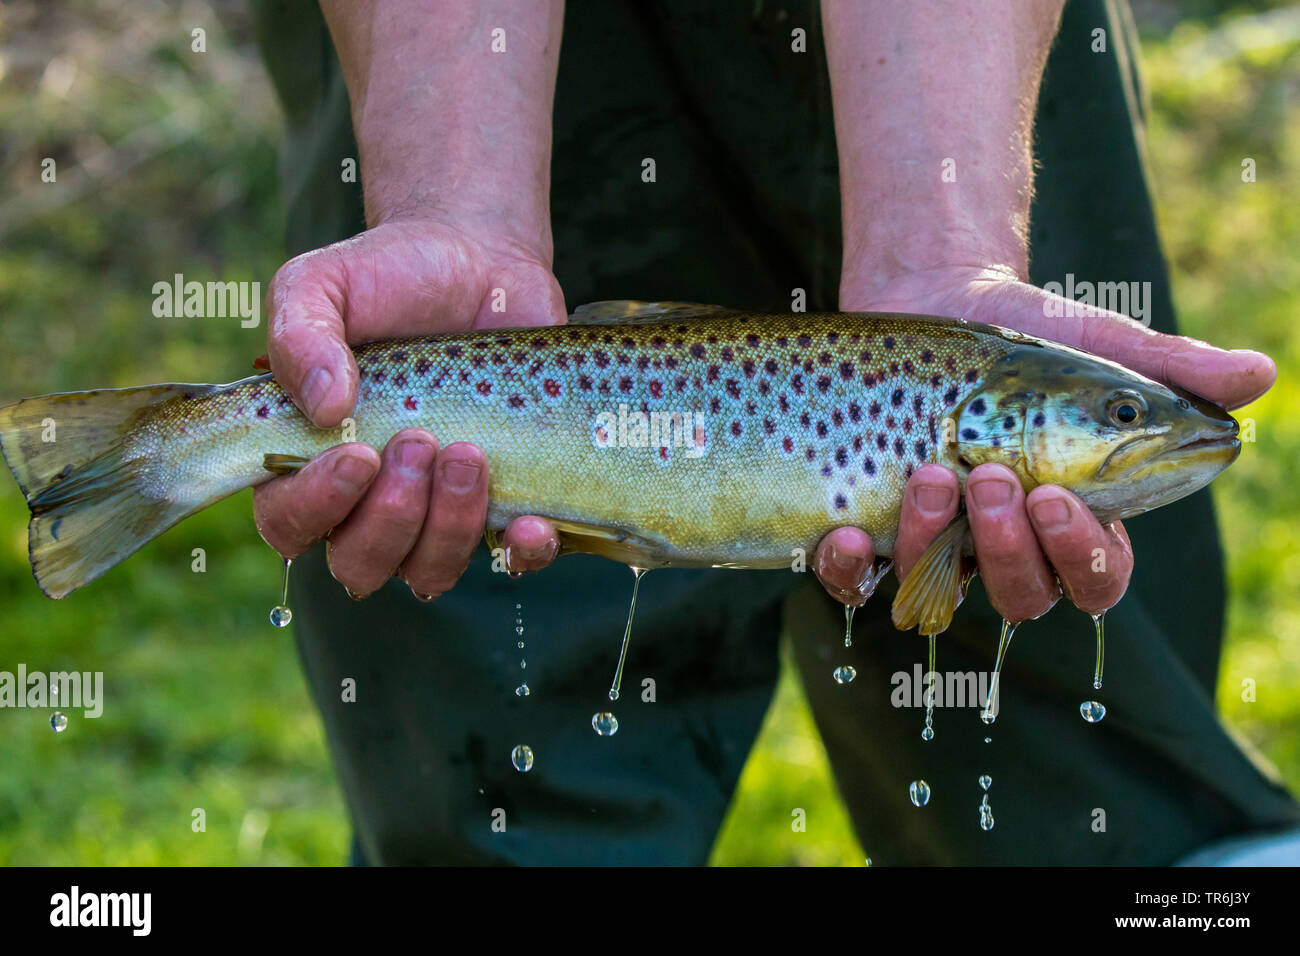 brown trout, river trout, brook trout (Salmo trutta fario), autochthon form, Germany, Bavaria Stock Photo